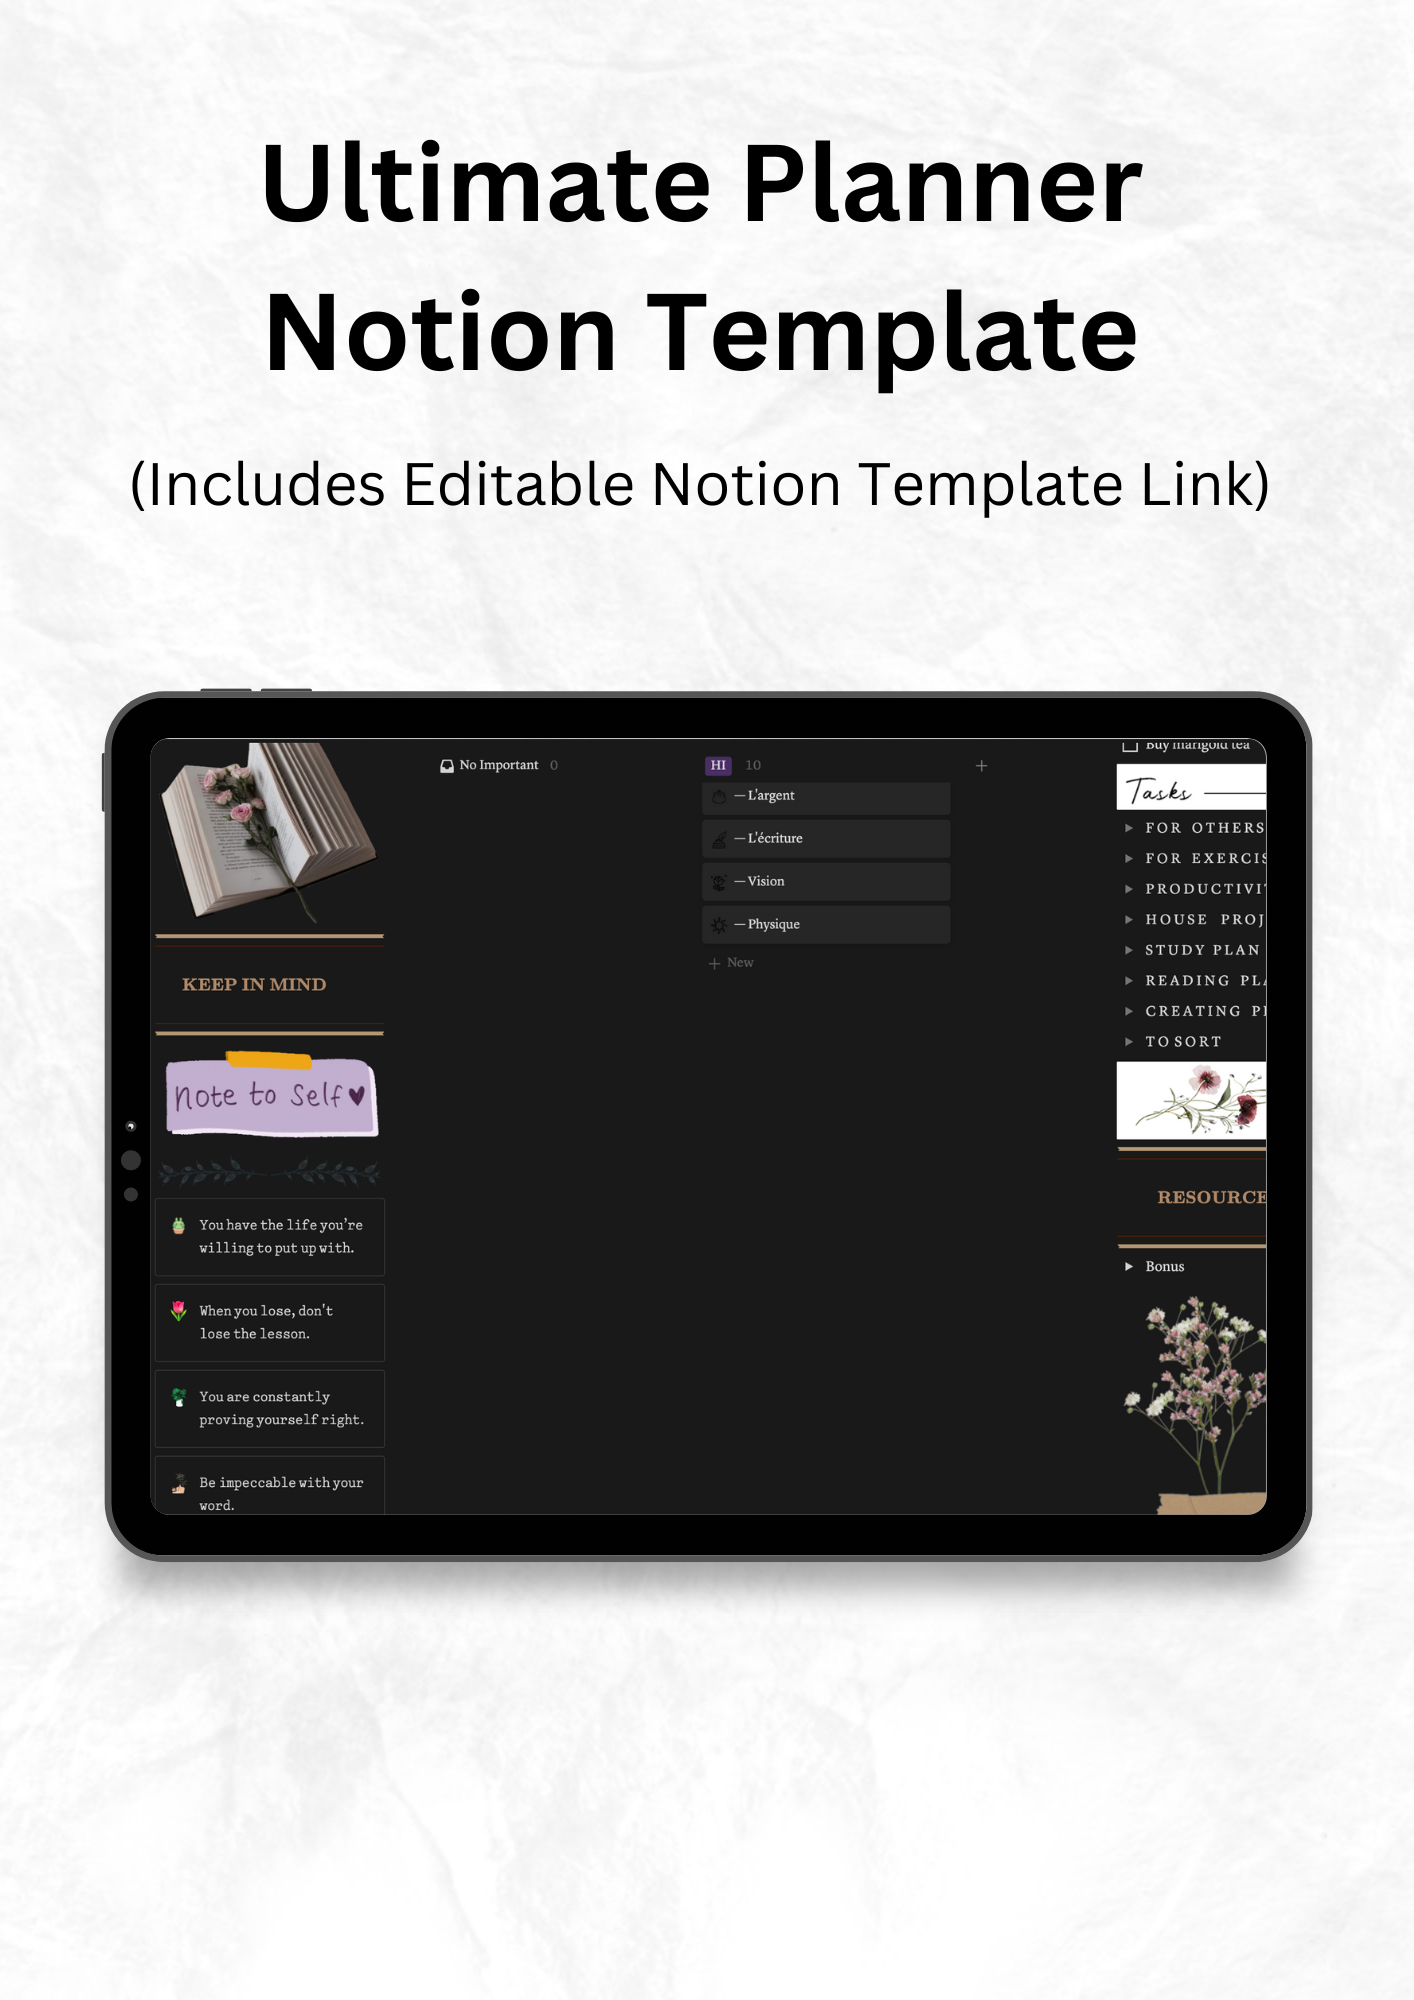 Ultimate Planner Notion Template